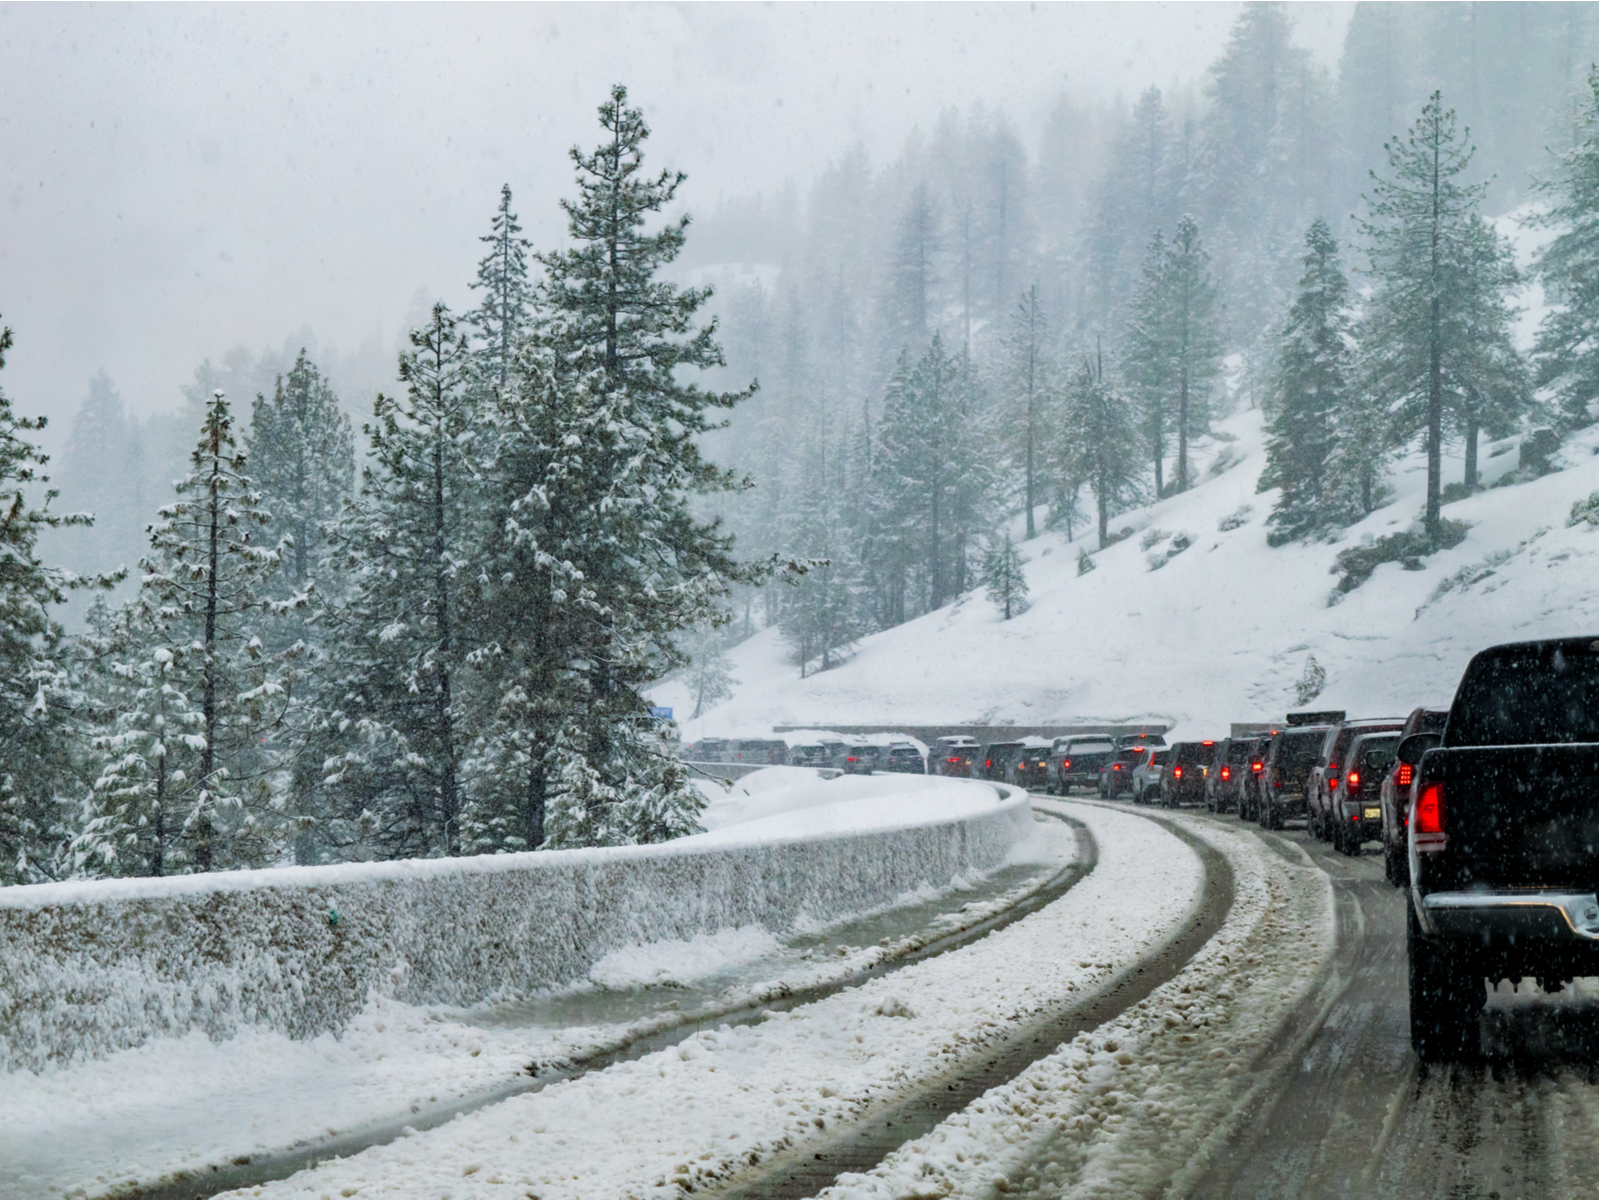 Trucks lined up on the highway in the winter with lots of snow during the worst time to visit Lake Tahoe